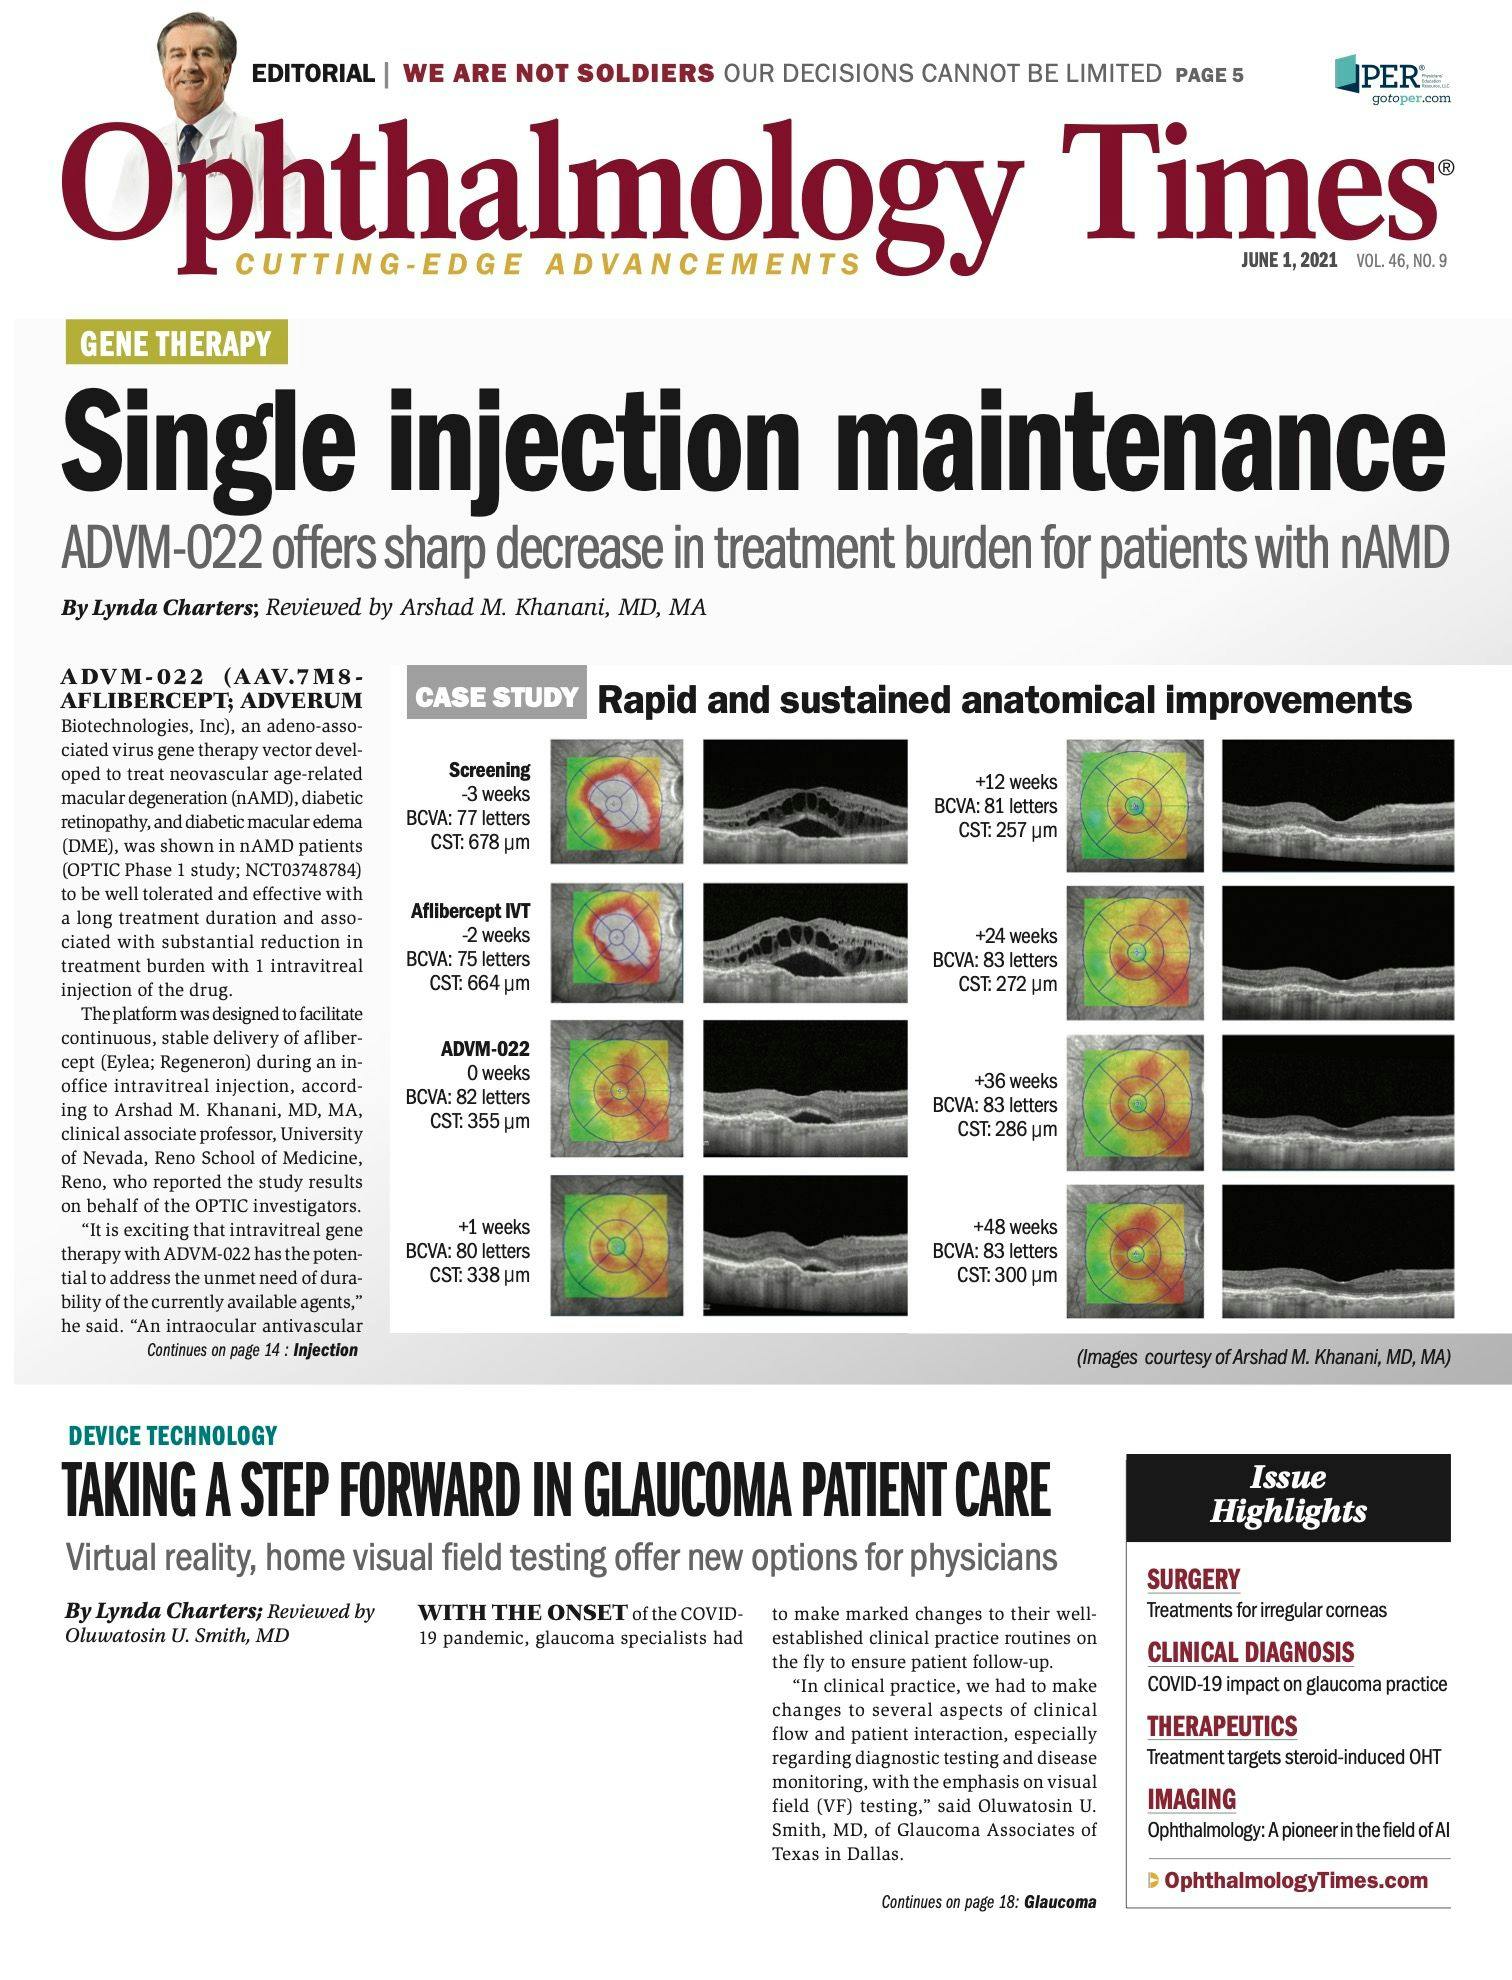 Ophthalmology Times: June 1, 2021 